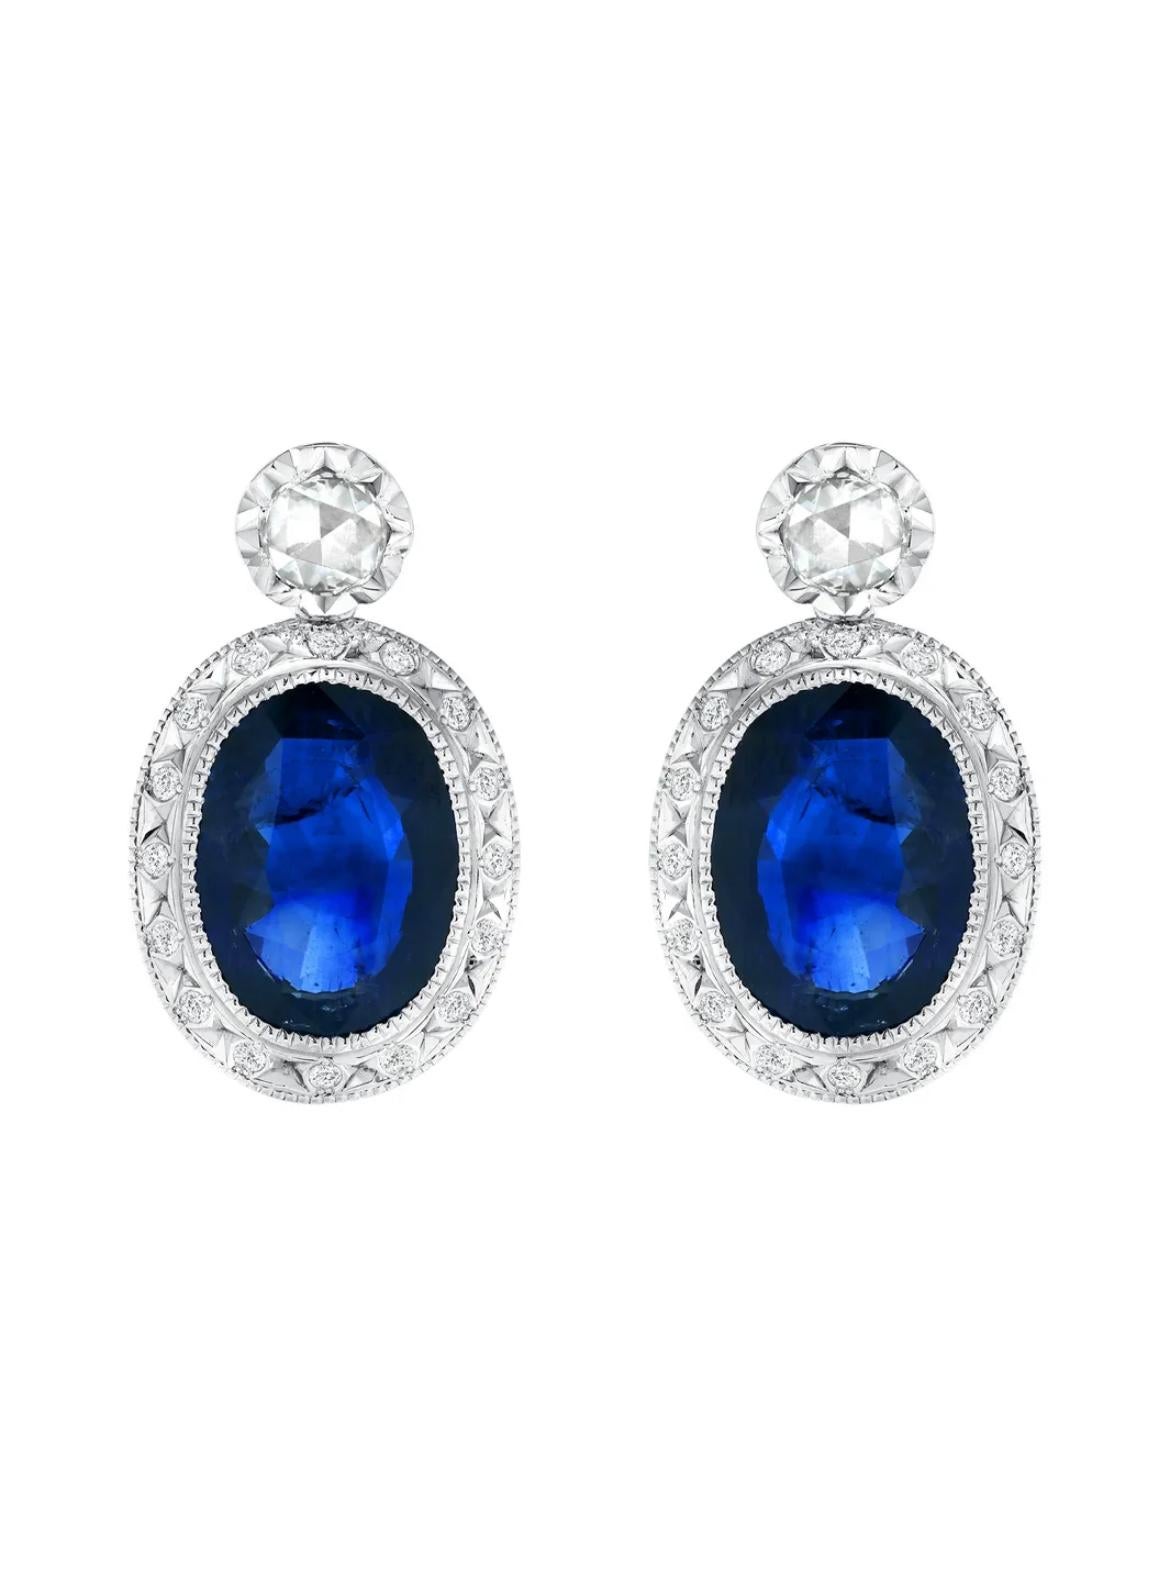 9.65ct Blue sapphires are paired with two rose-cut diamonds and numerous round white diamonds, weighing a total of 0.86 carats in 18K white gold earrings.